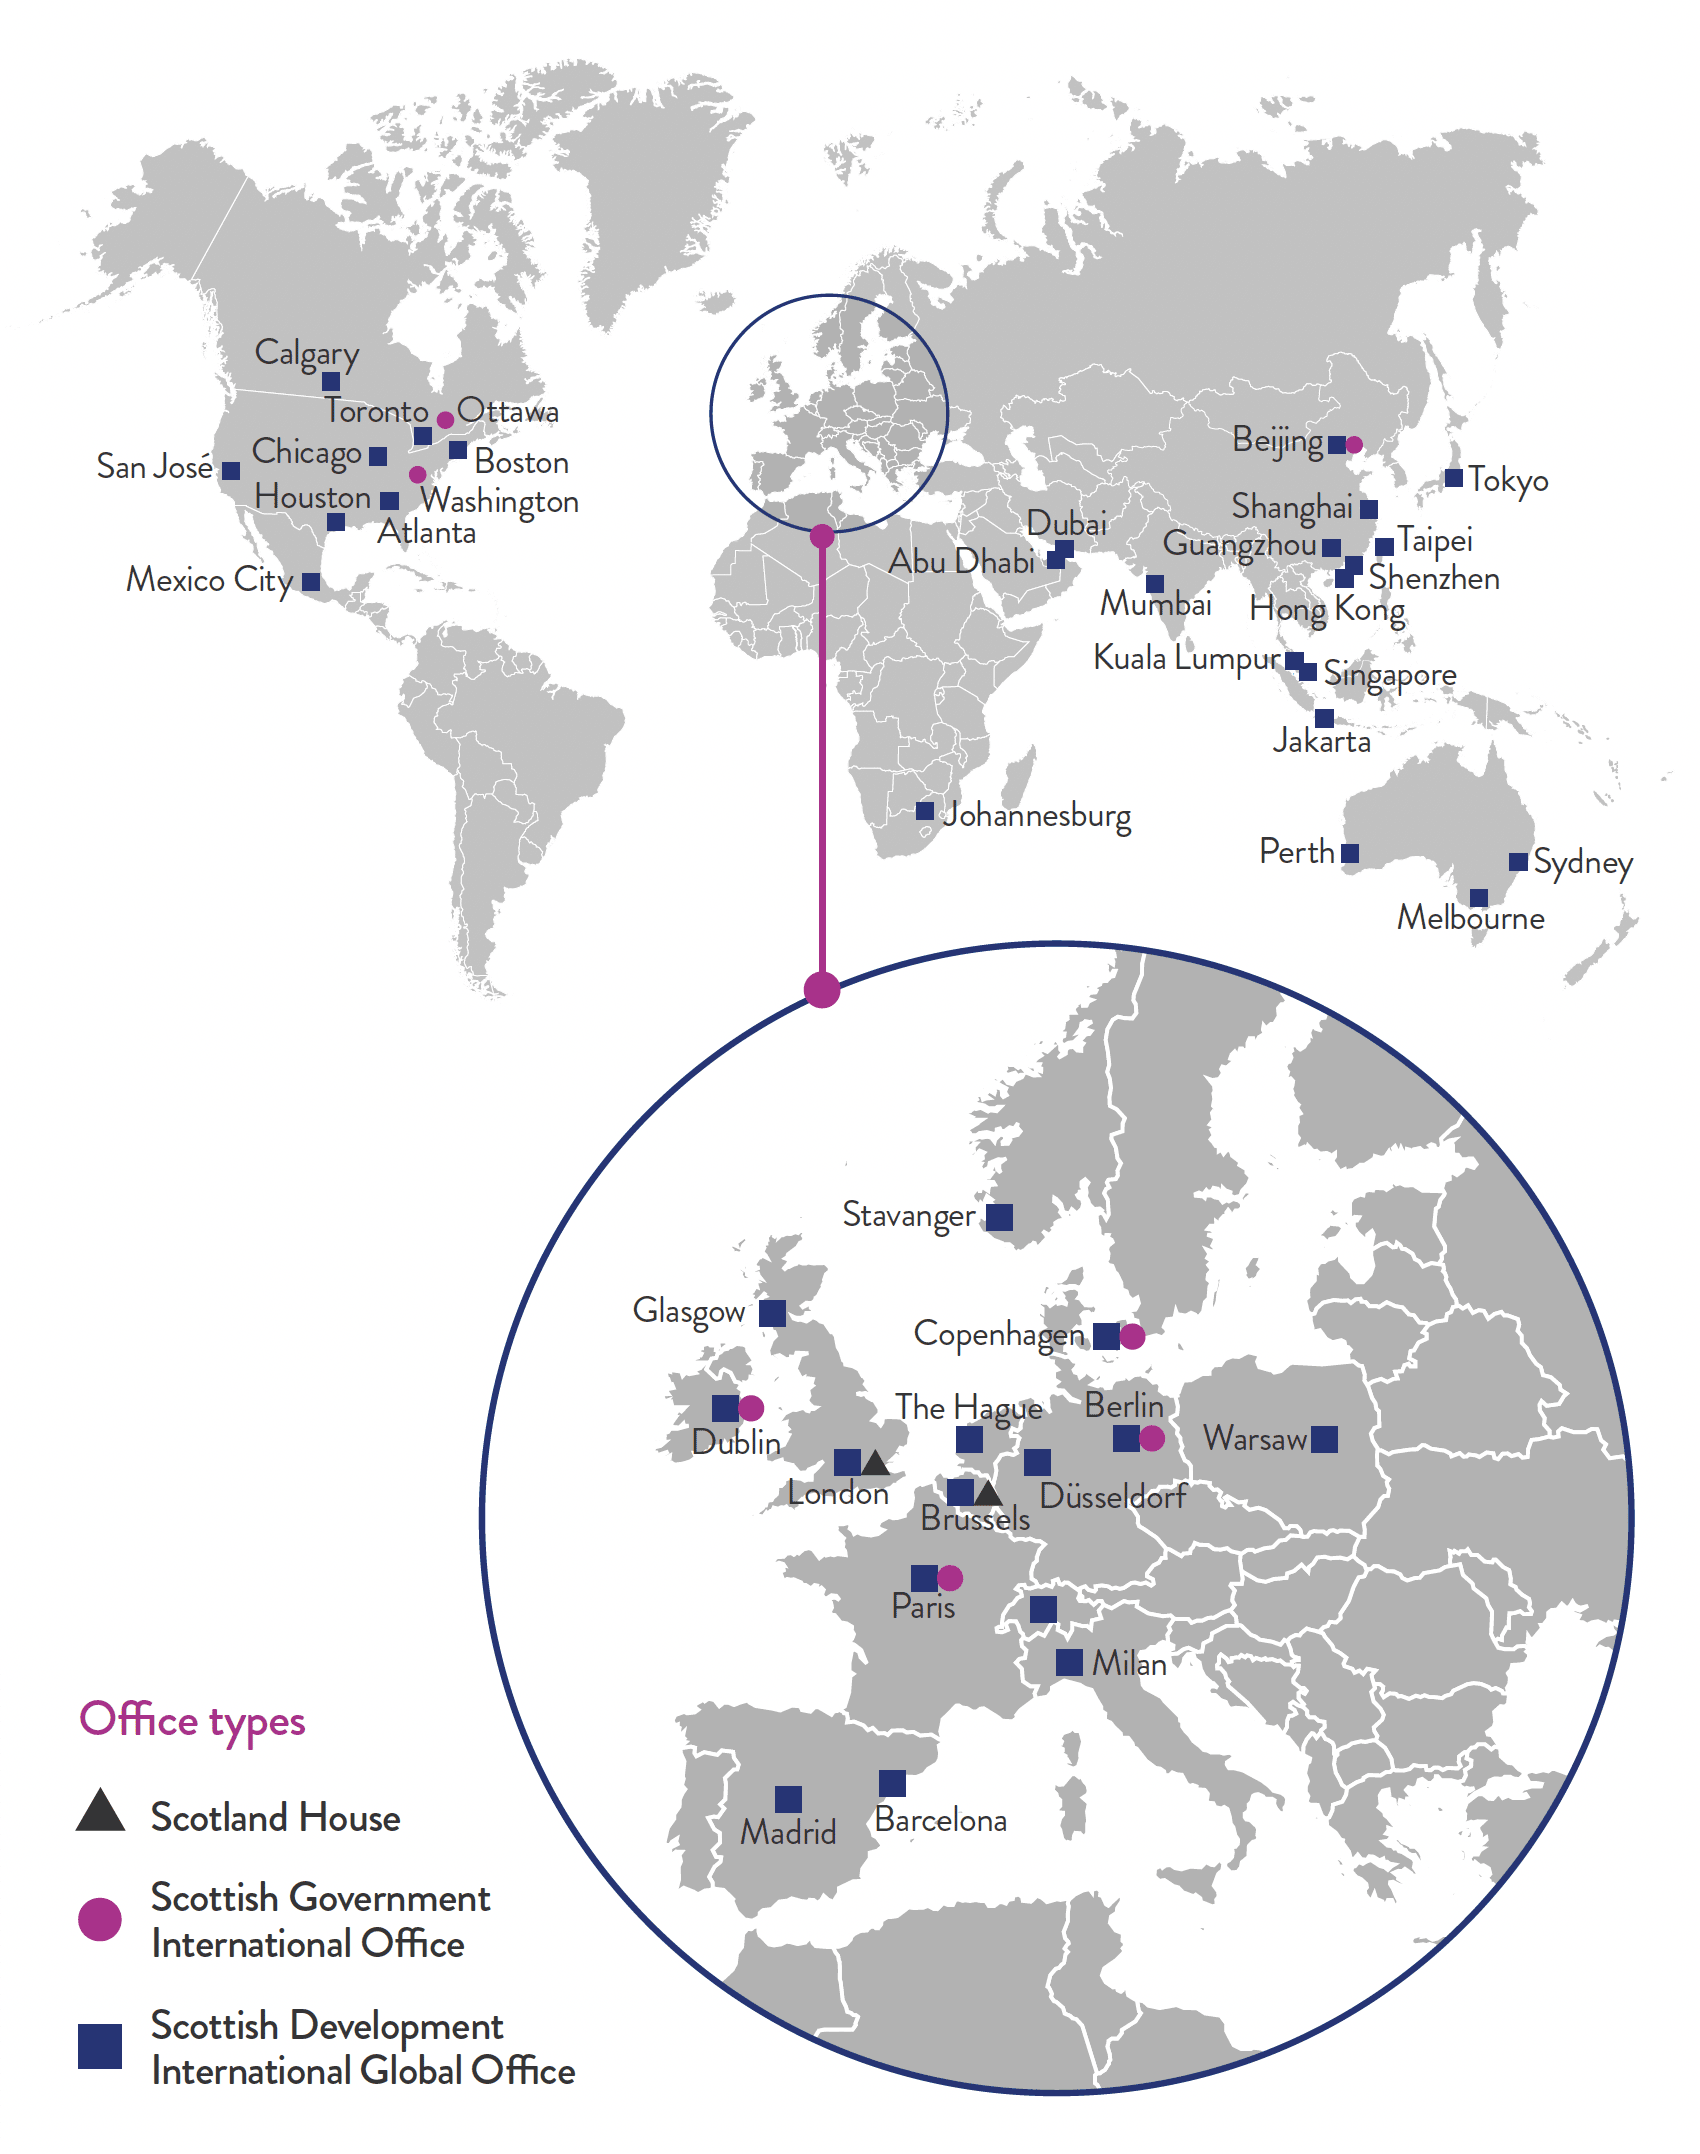 a map of the world with different cities showing location of international offices